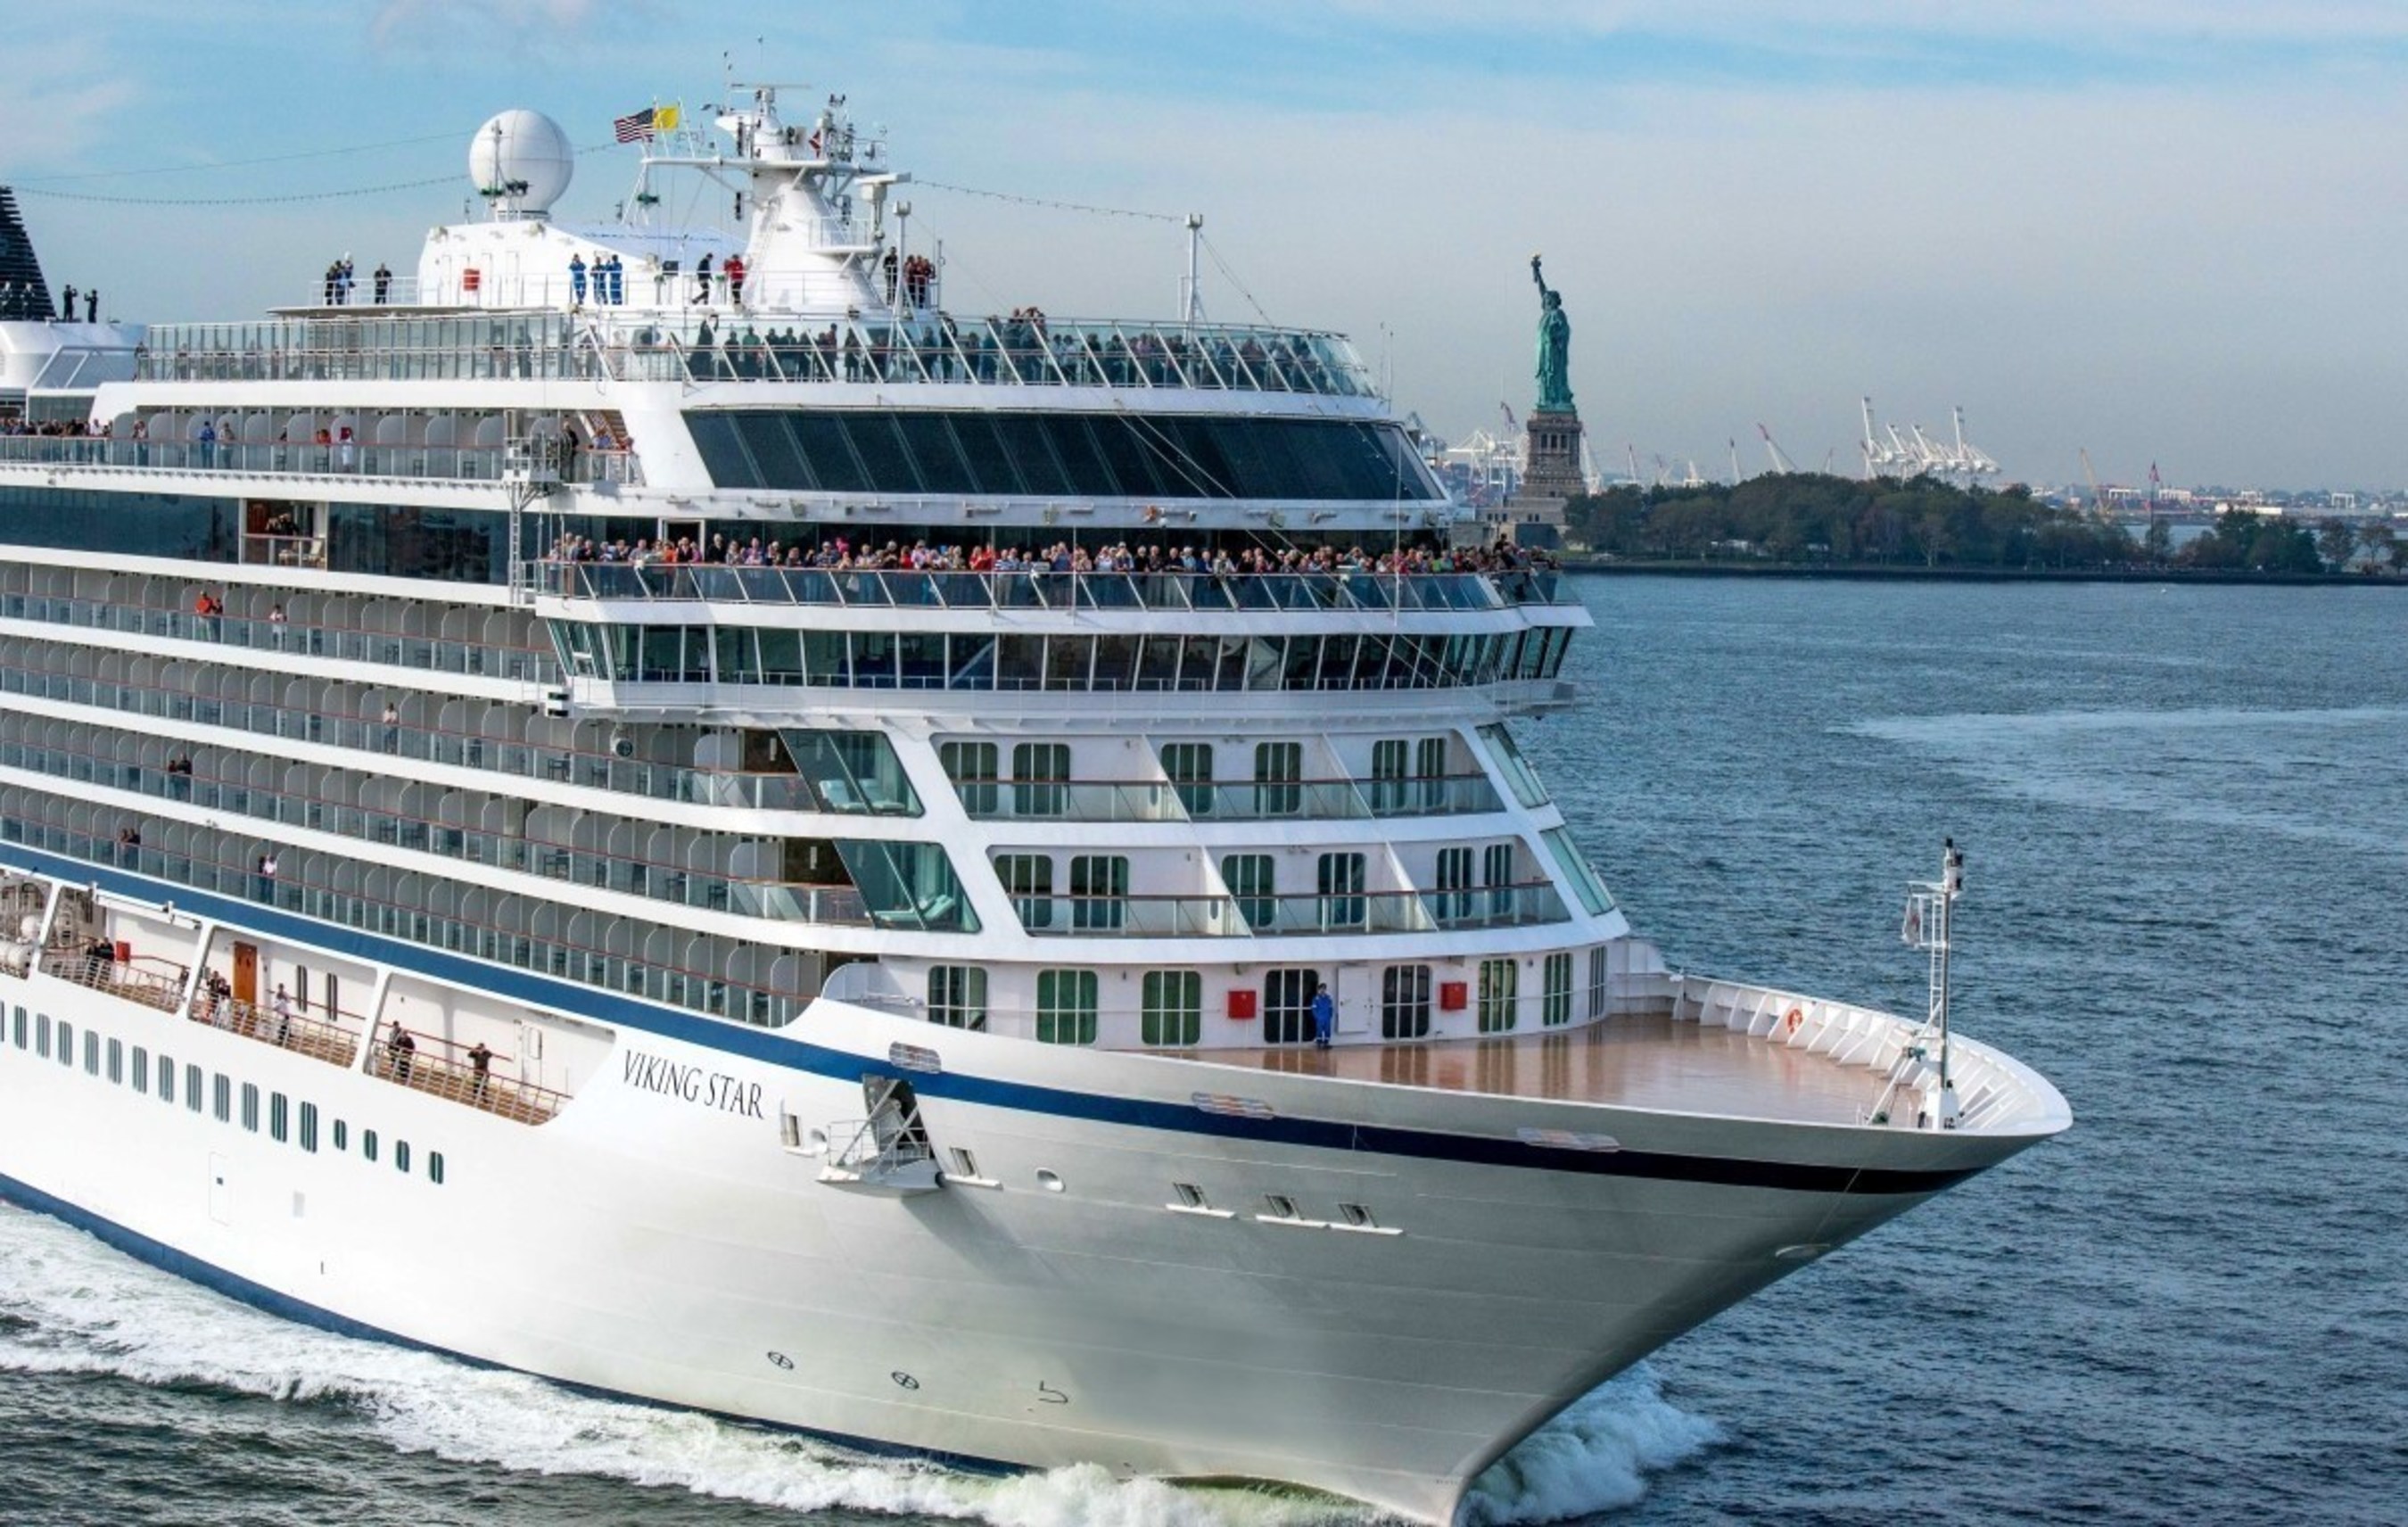 Viking Star, the first 930-passenger ocean ship from Viking Cruises, sails past the Statue of Liberty on Thursday, Oct. 13, 2016 as it calls on New York for the first time. Currently sailing its inaugural North American itinerary, Viking Star will continue onto the Caribbean where it will cruise during the winter season. For more information, visit www.vikingoceancruises.com.